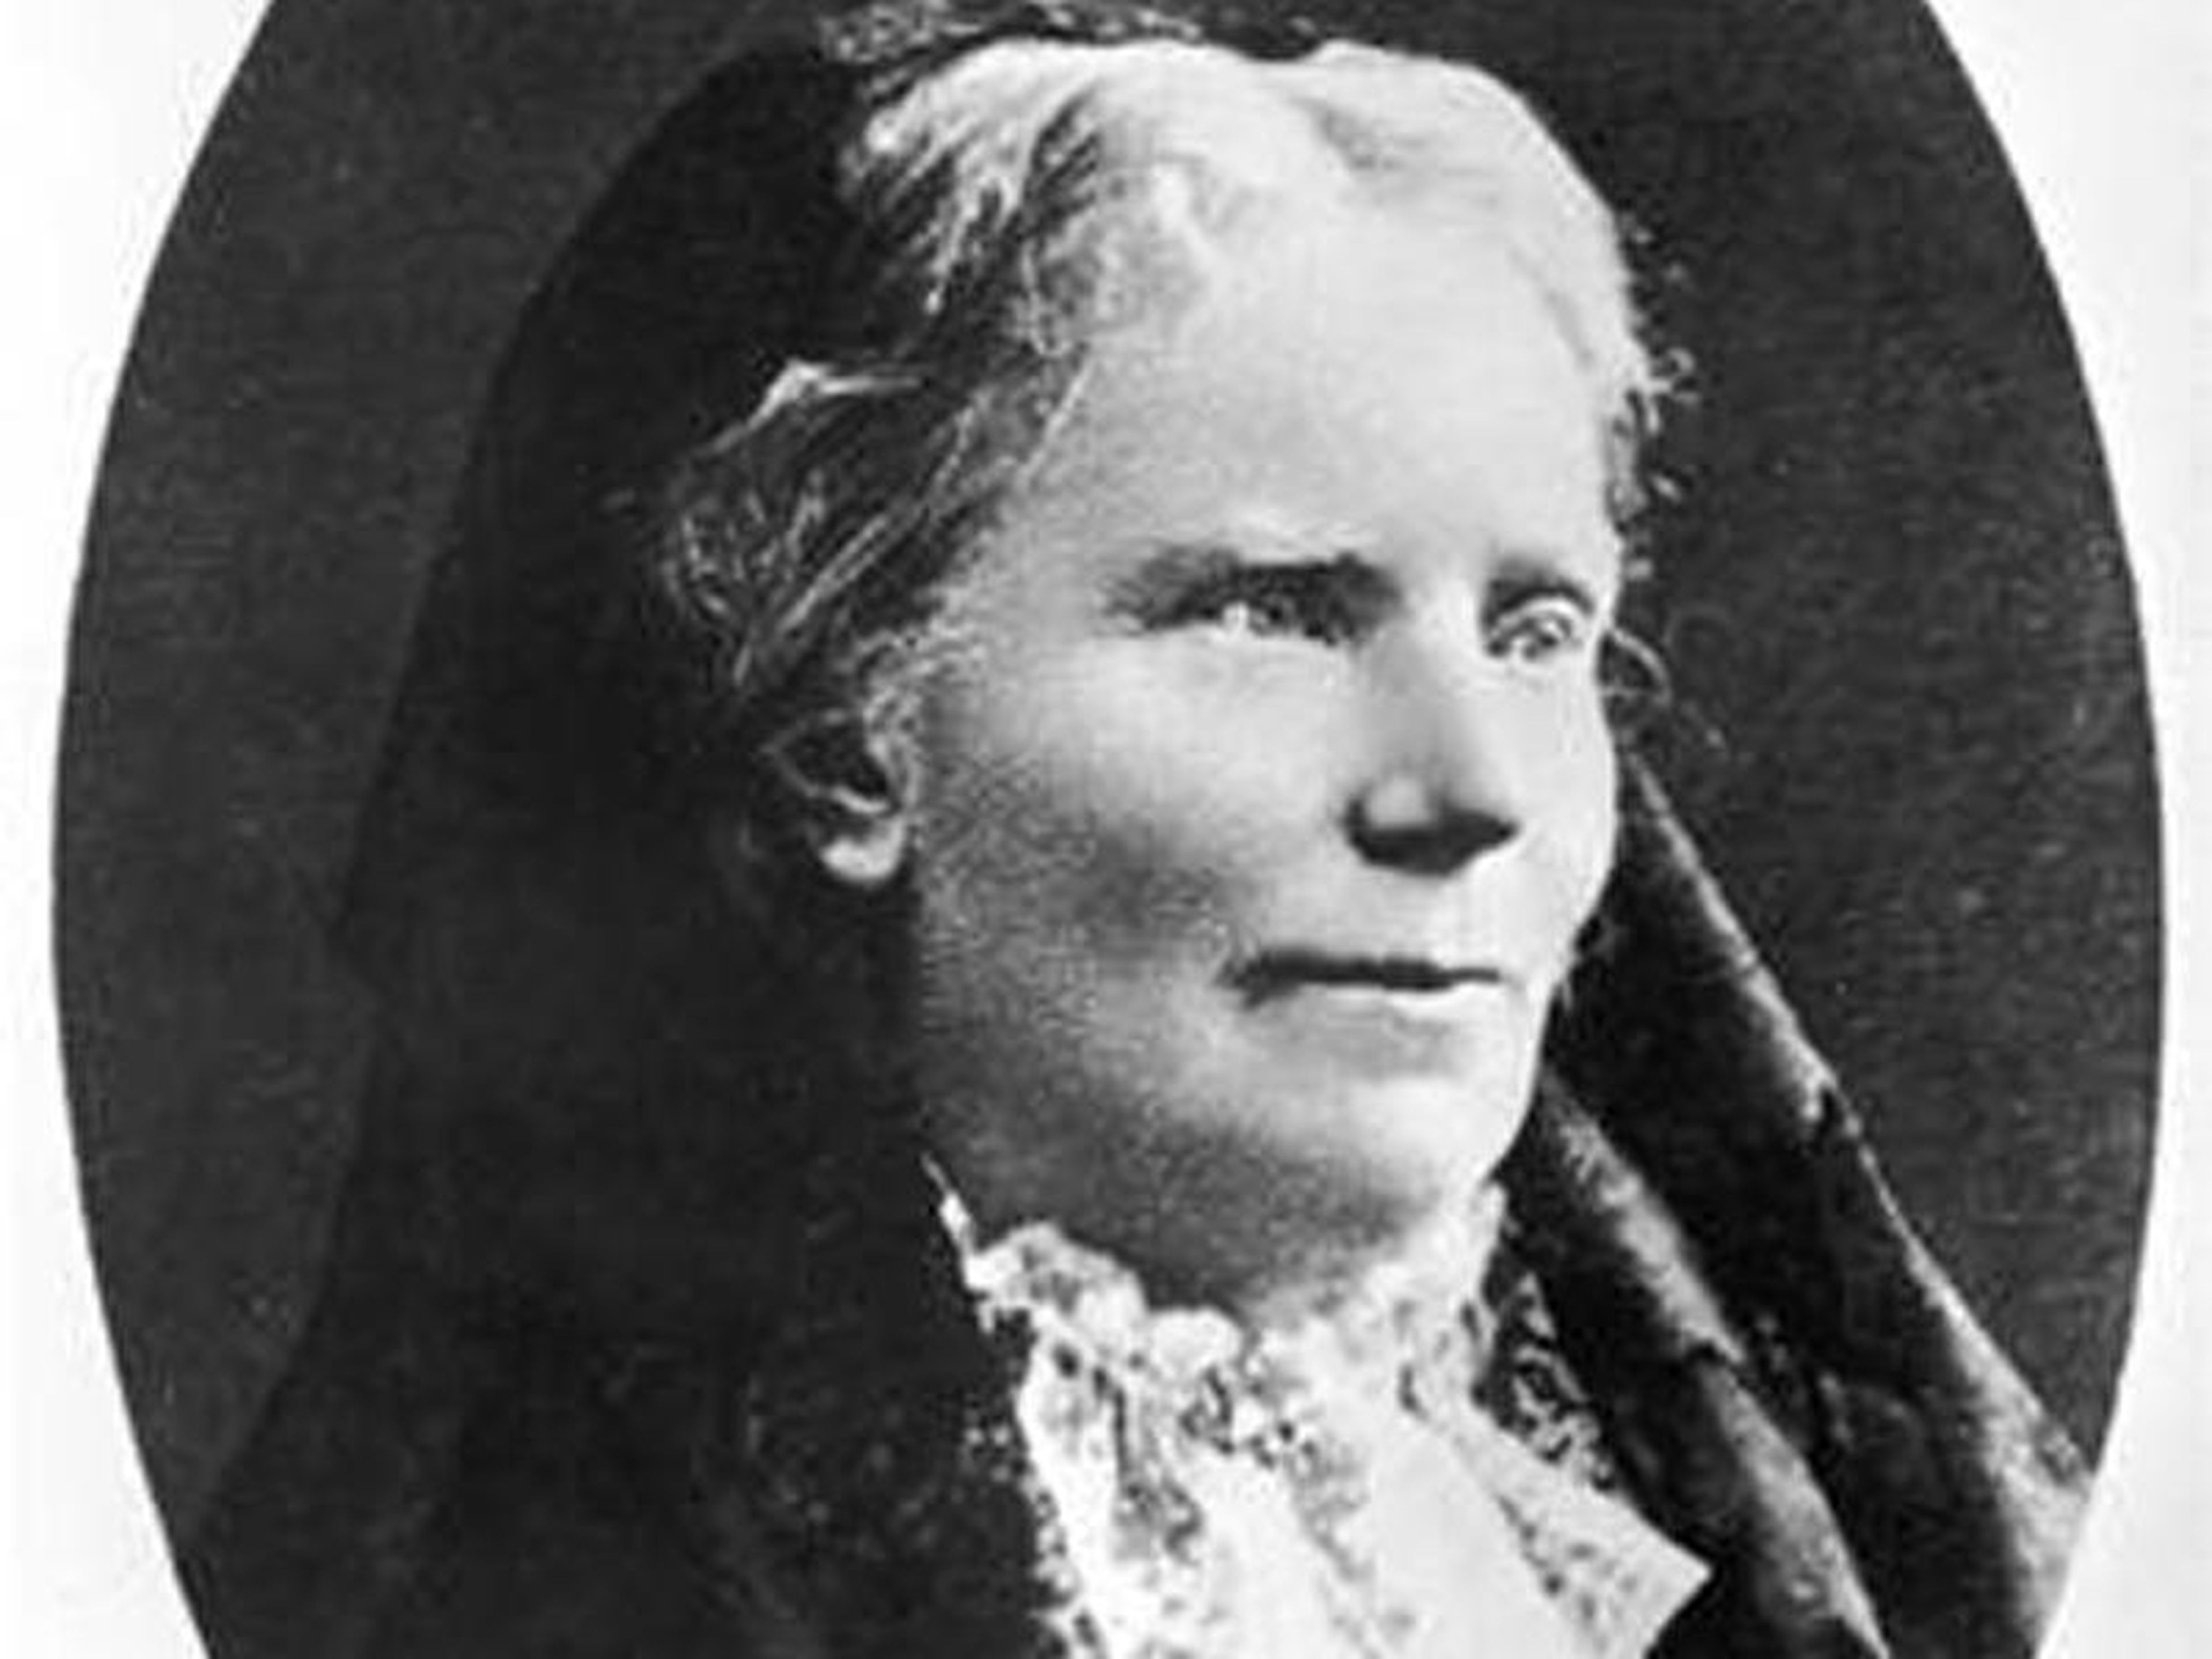 Elizabeth Blackwell became the first woman to her earn her medical degree in the United States in 1849.